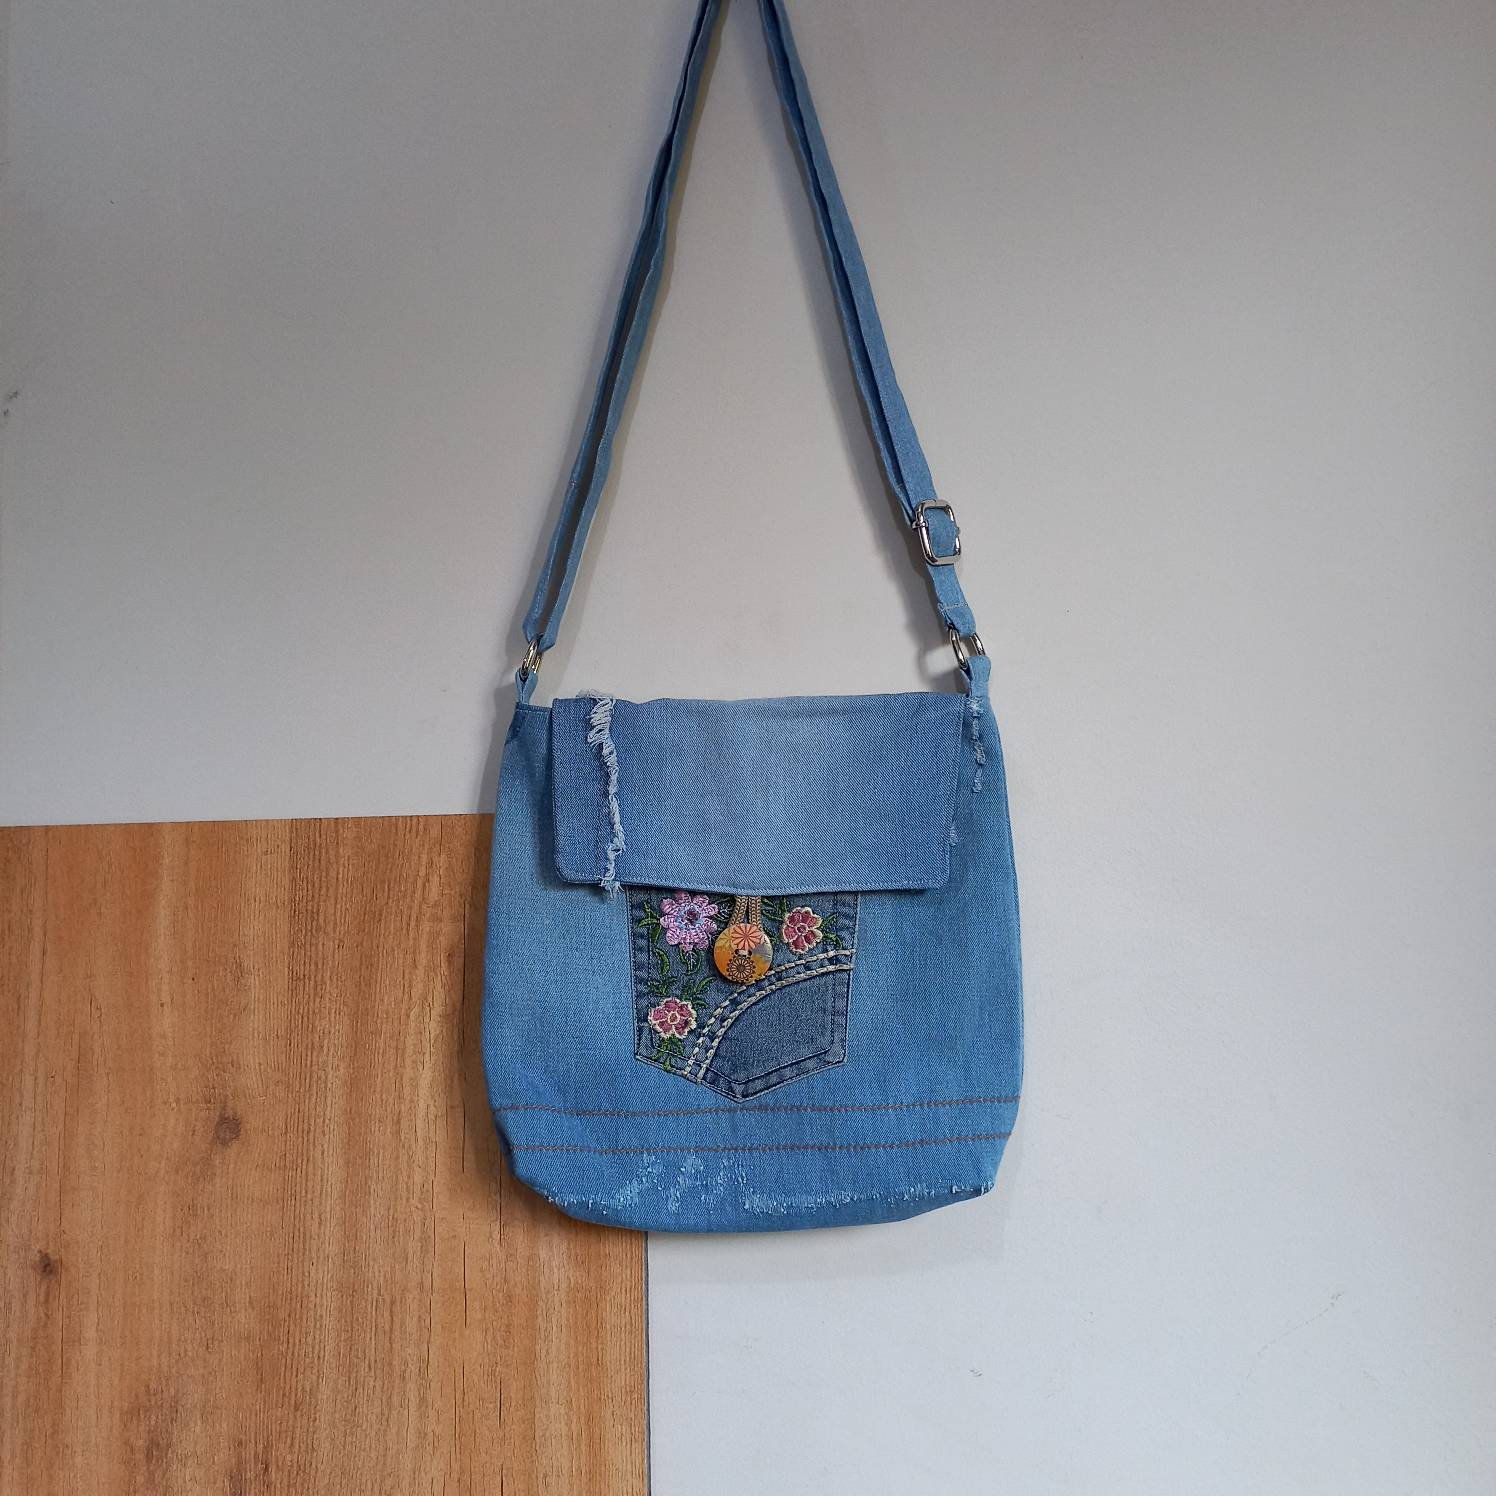 Mini Cute Crossbody Bag of Patchwork Jeans With an Adjustable Cross ...